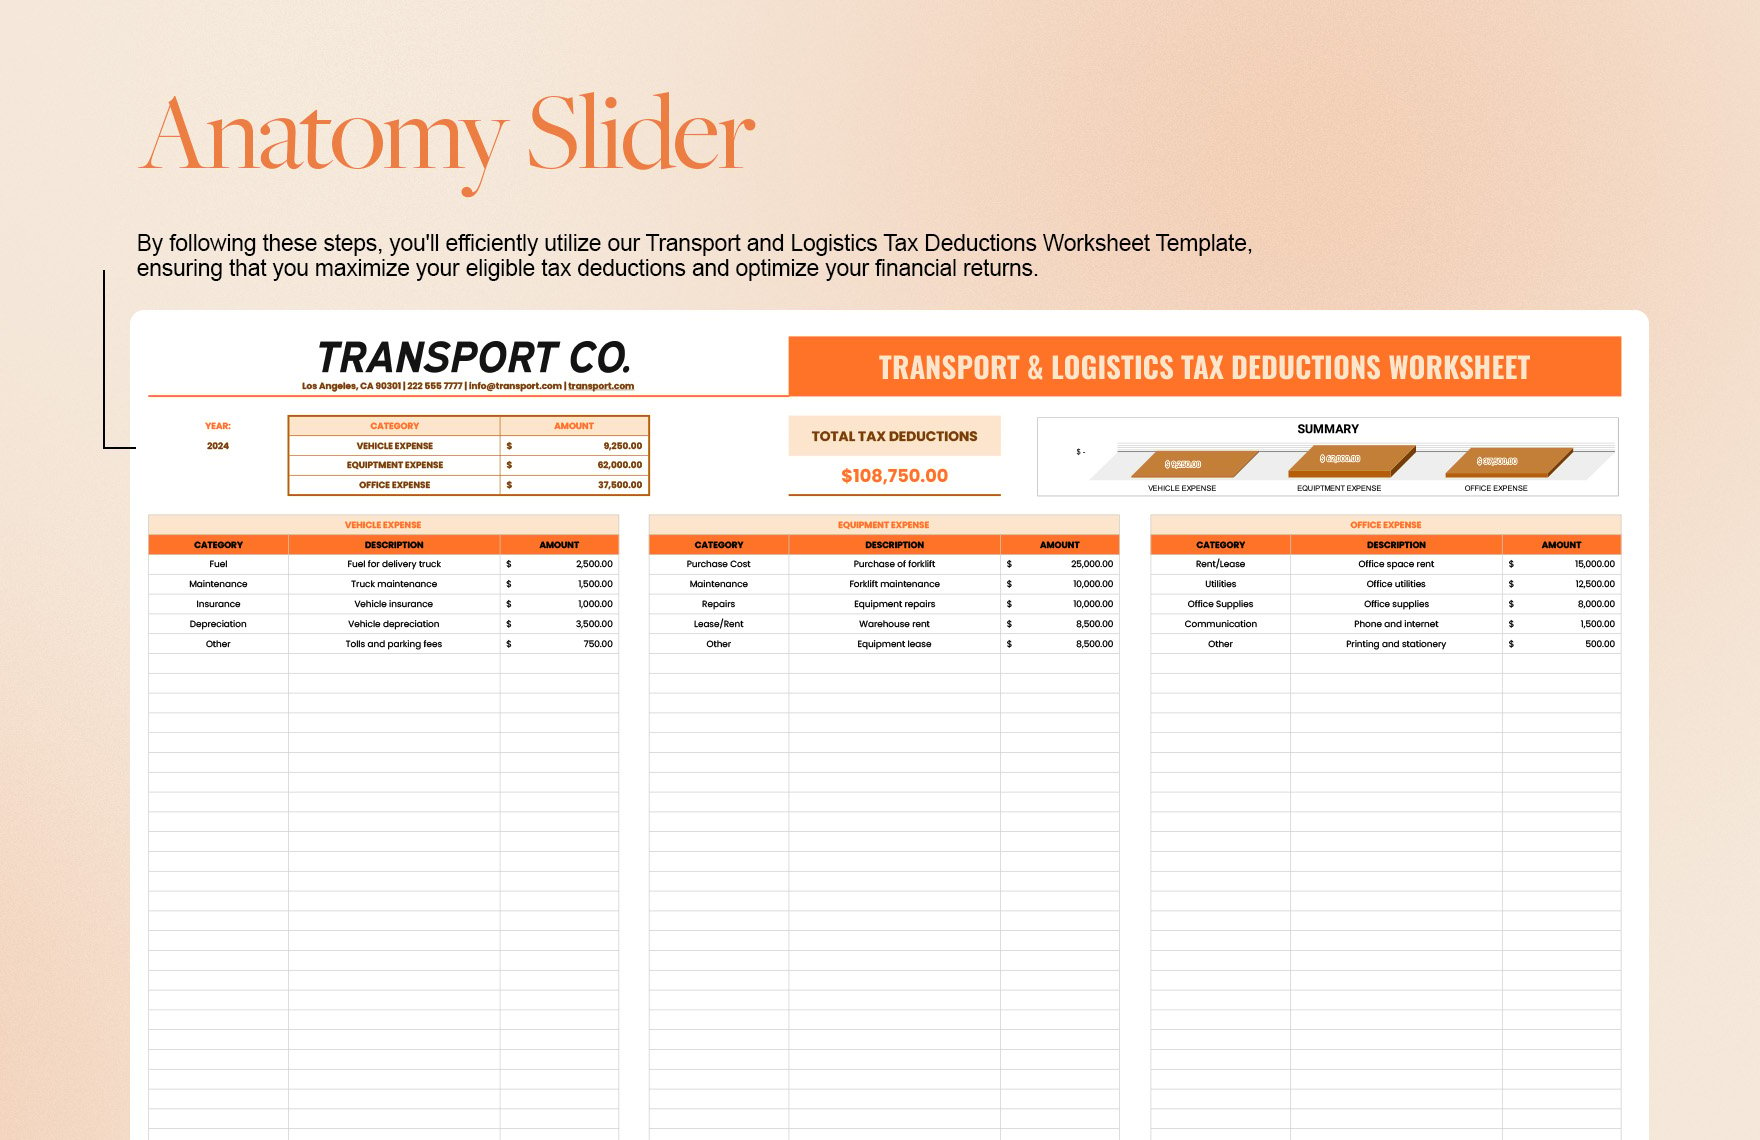 Transport and Logistics Tax Deductions Worksheet Template